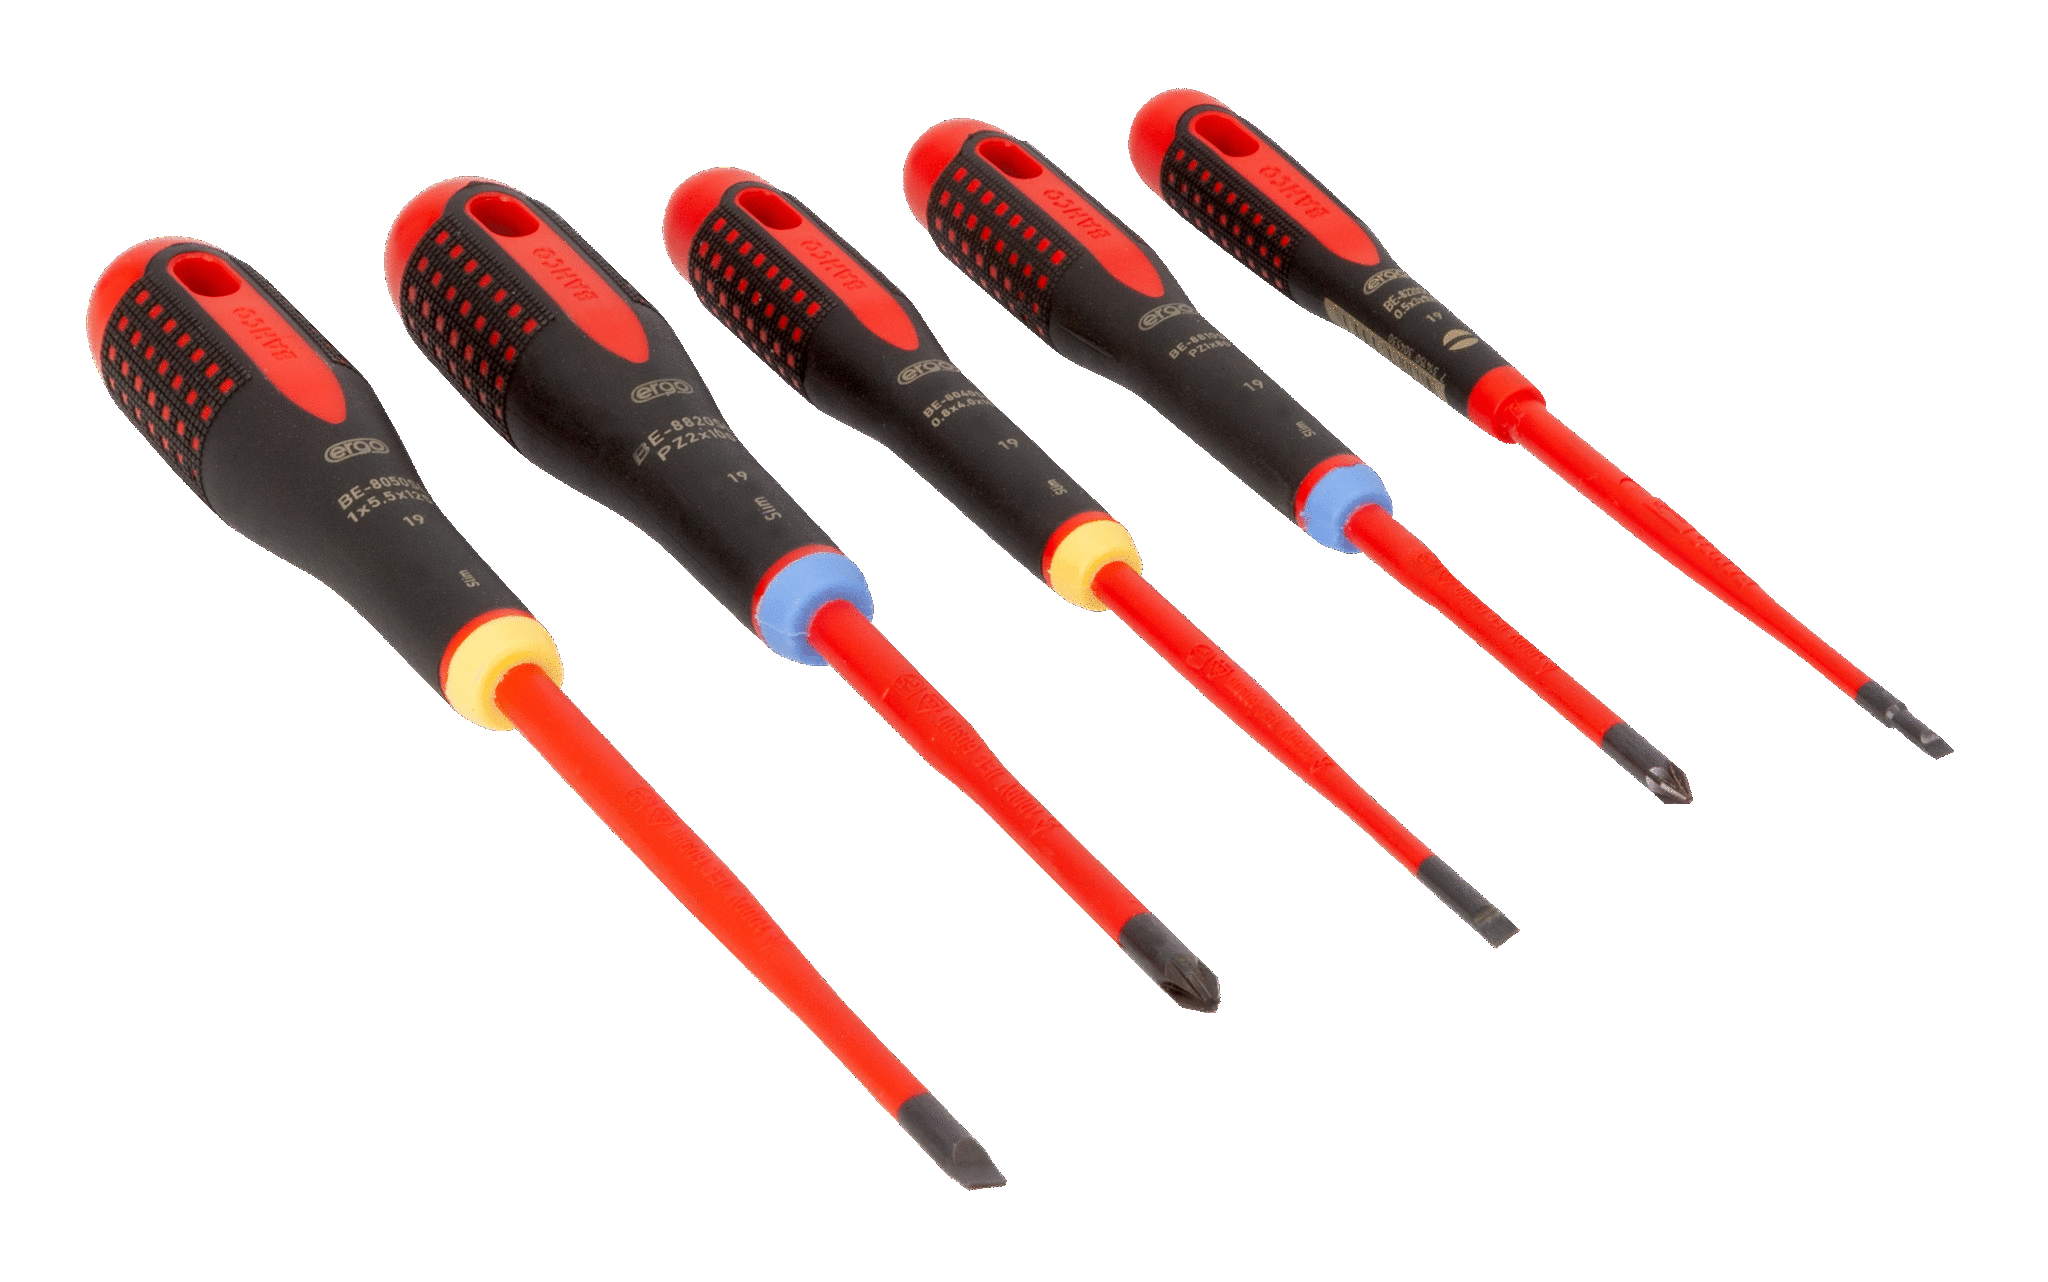 ERGO™ Slim VDE Insulated Slotted and Pozidriv Screwdriver Set with 3-Component Handle 5 Pcs - BE-9882SL by Bahco